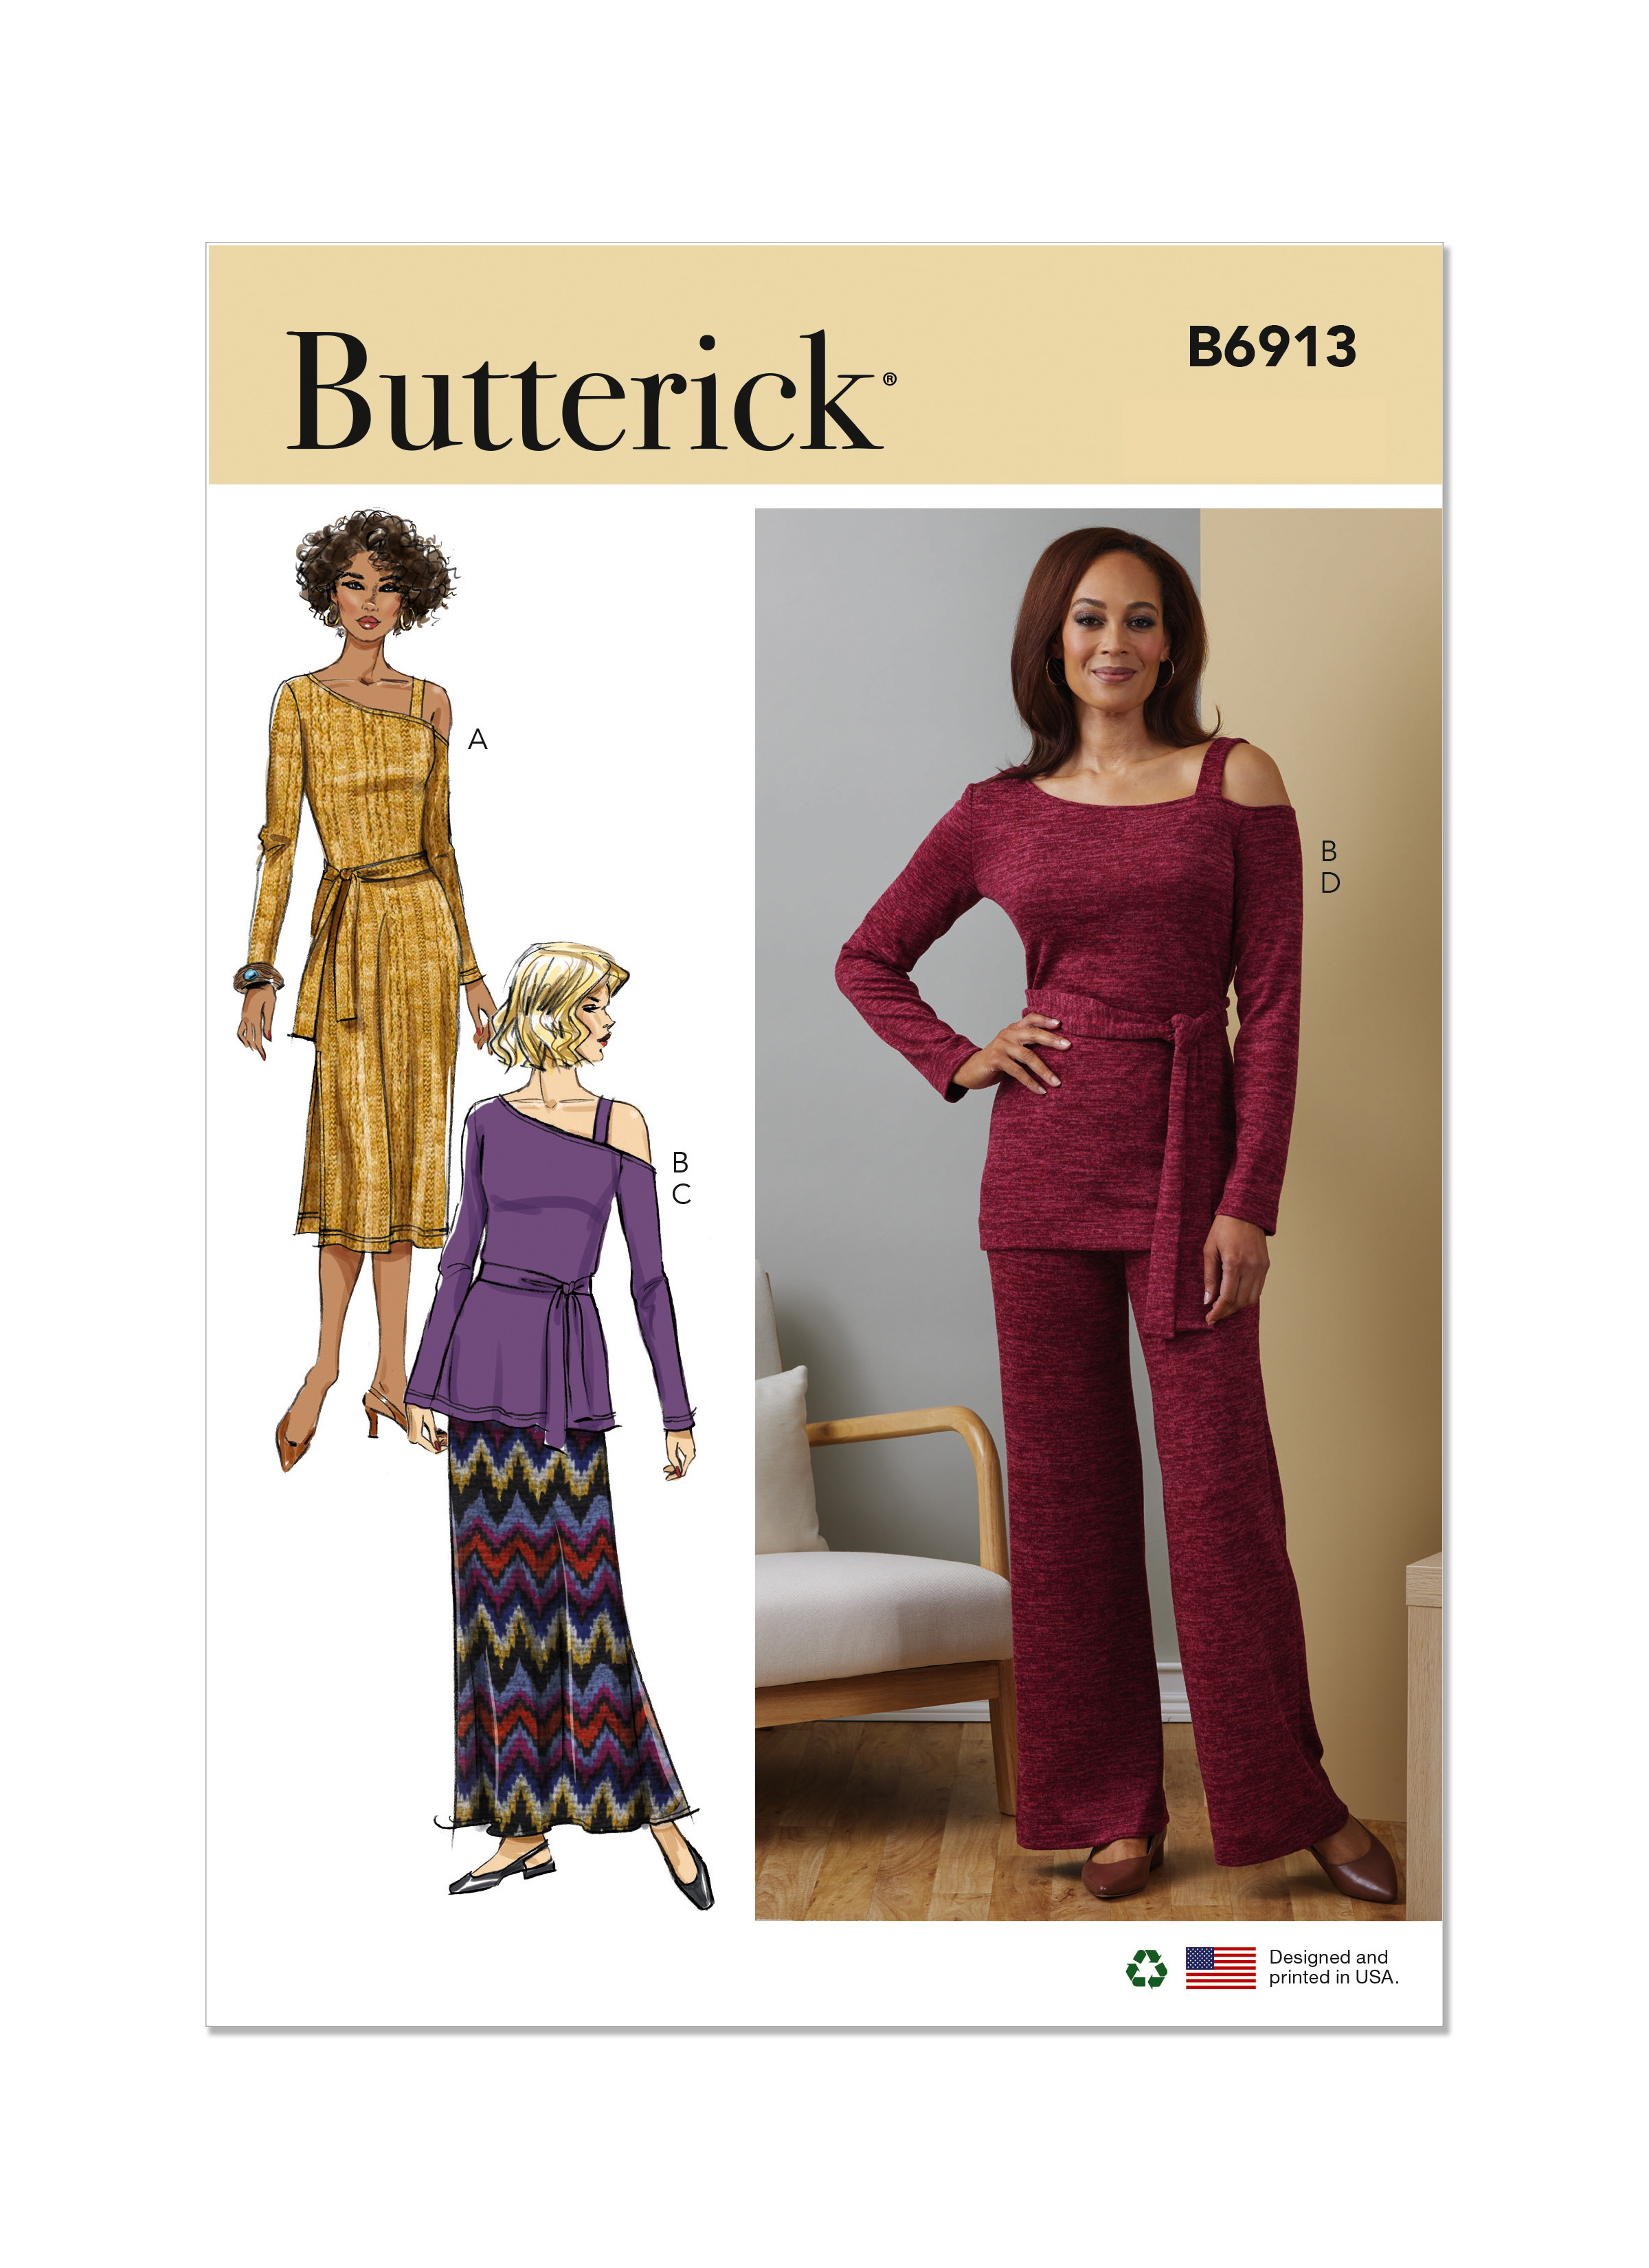 Butterick 6913 Misses' Knit Dress, Top, Skirt and Pants